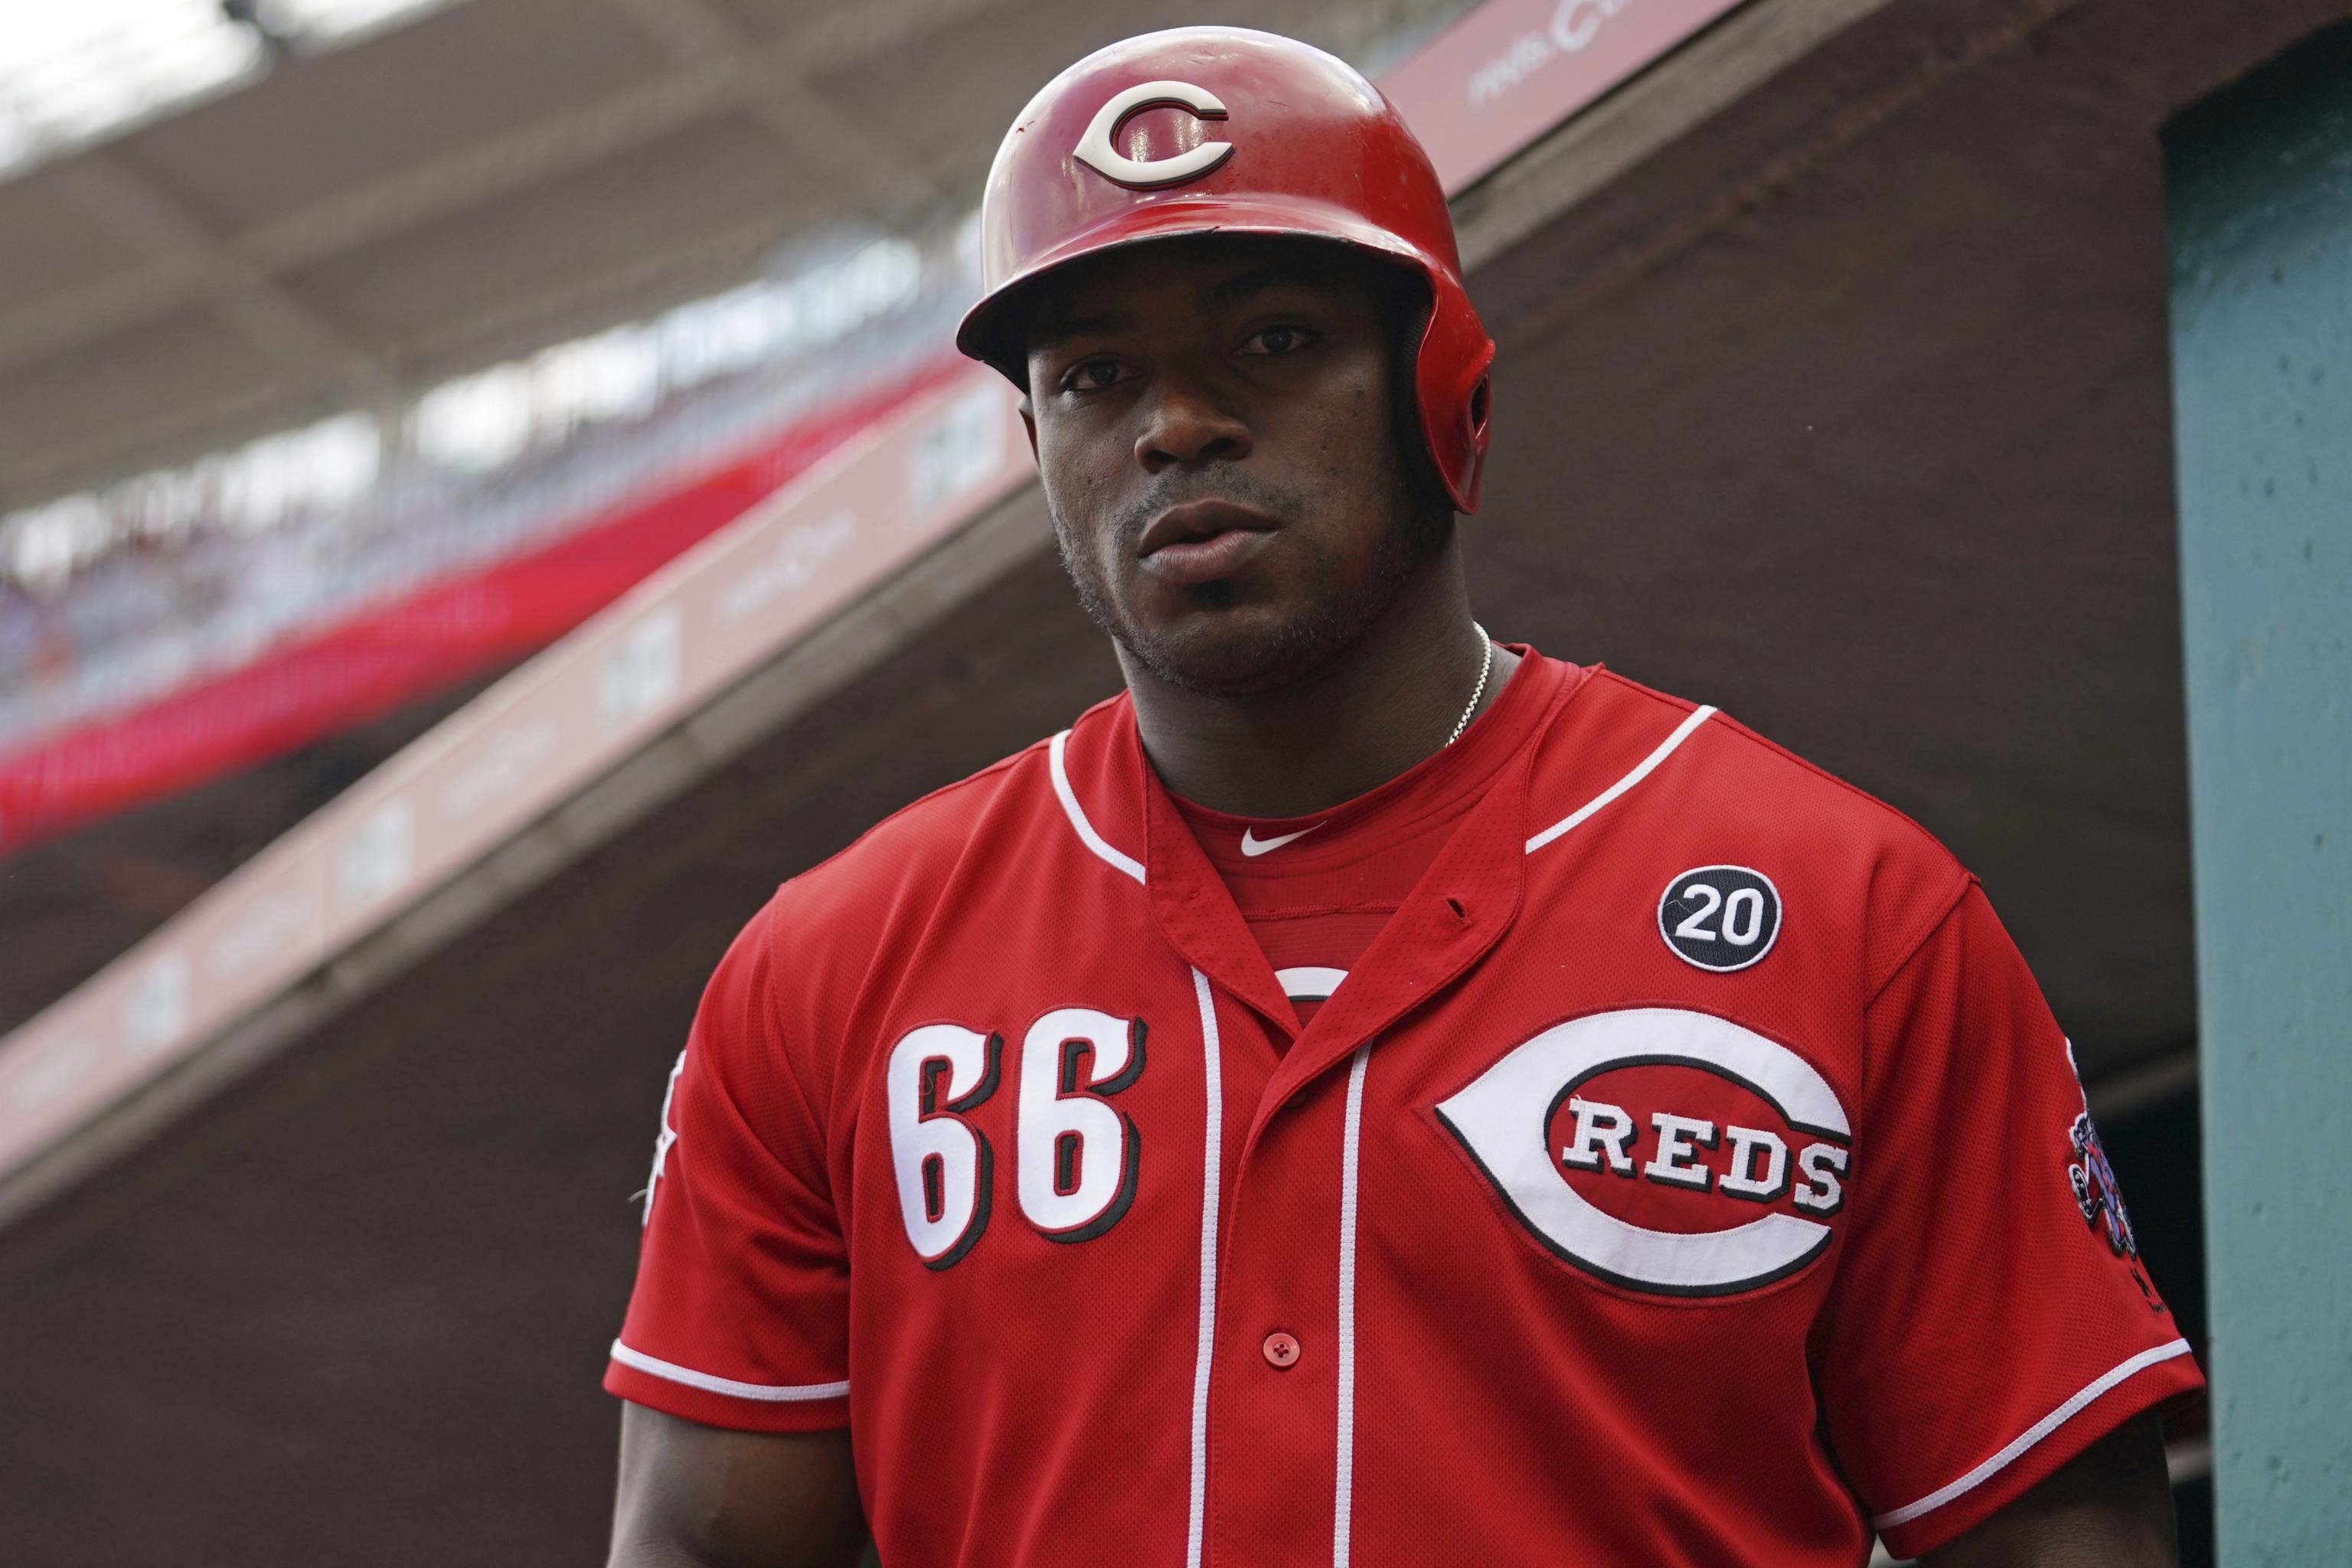 Report: Reds' Puig emerging as strong trade candidate